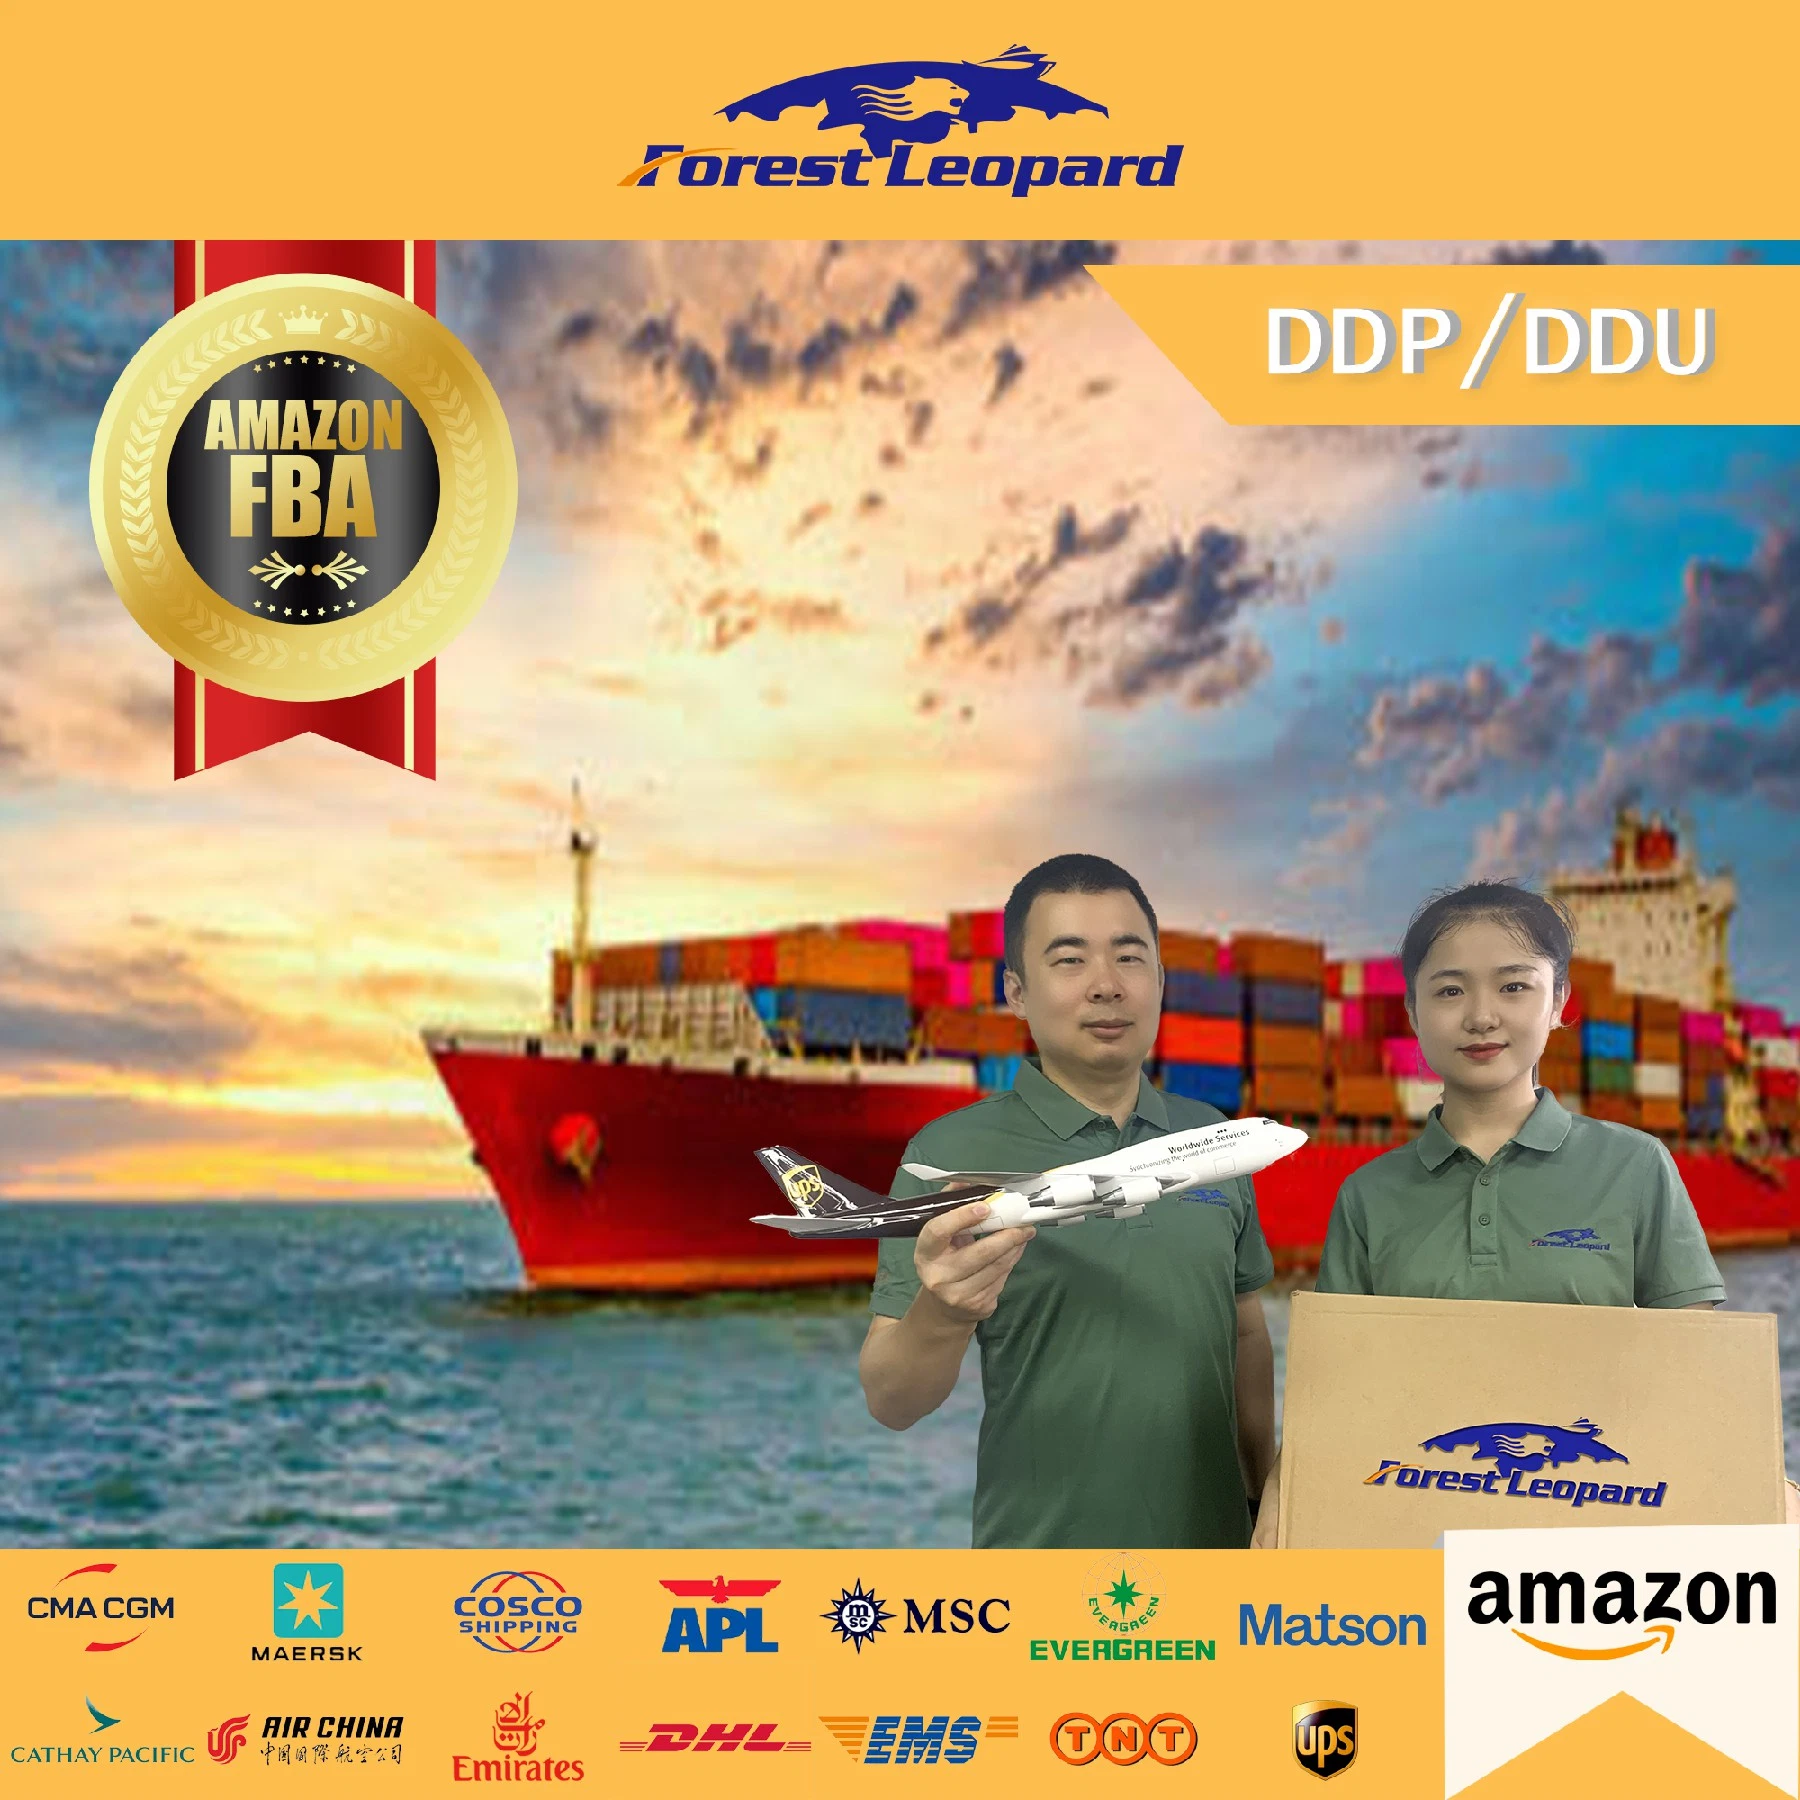 DDP Door to Door Service Freight Forwarder to USA/UK/Italy/France/Netherlands /Germany/Canada Fba Amazon by Air Shipping From CH